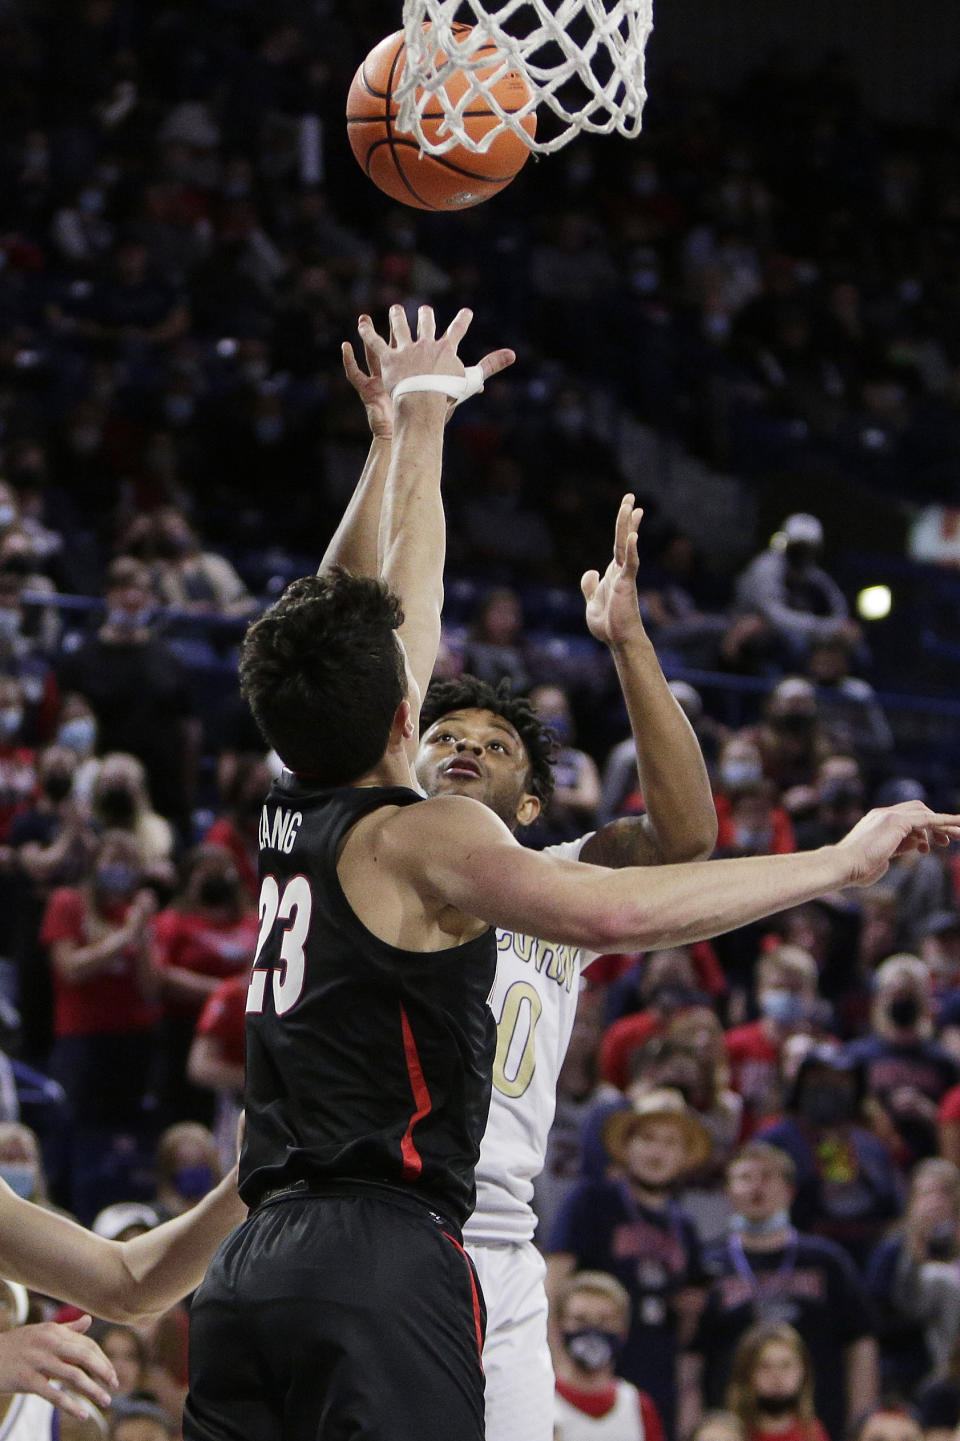 Alcorn State guard Paul King, right, shoots over Gonzaga guard Matthew Lang during the second half of an NCAA college basketball game, Monday, Nov. 15, 2021, in Spokane, Wash. (AP Photo/Young Kwak)